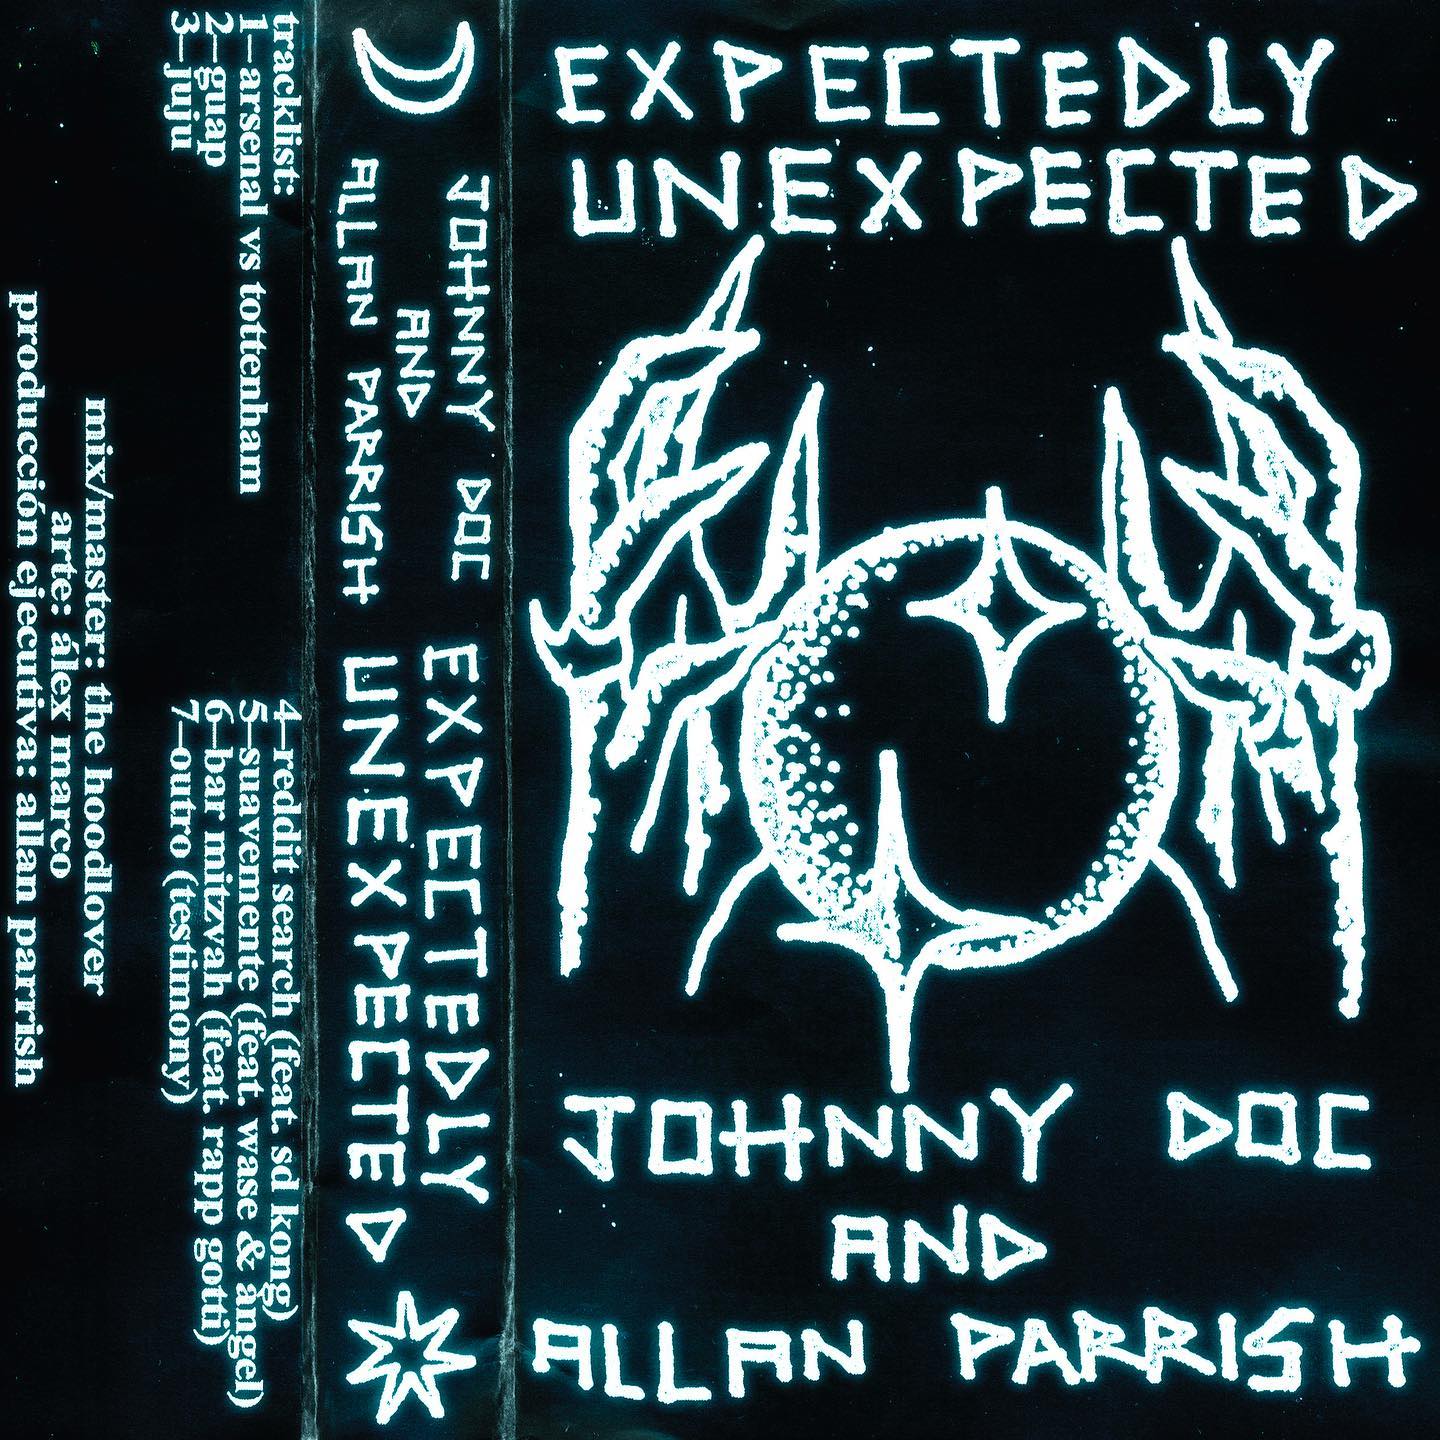 Johnny_doc___allan_parrish_-_expectedly_unexpected